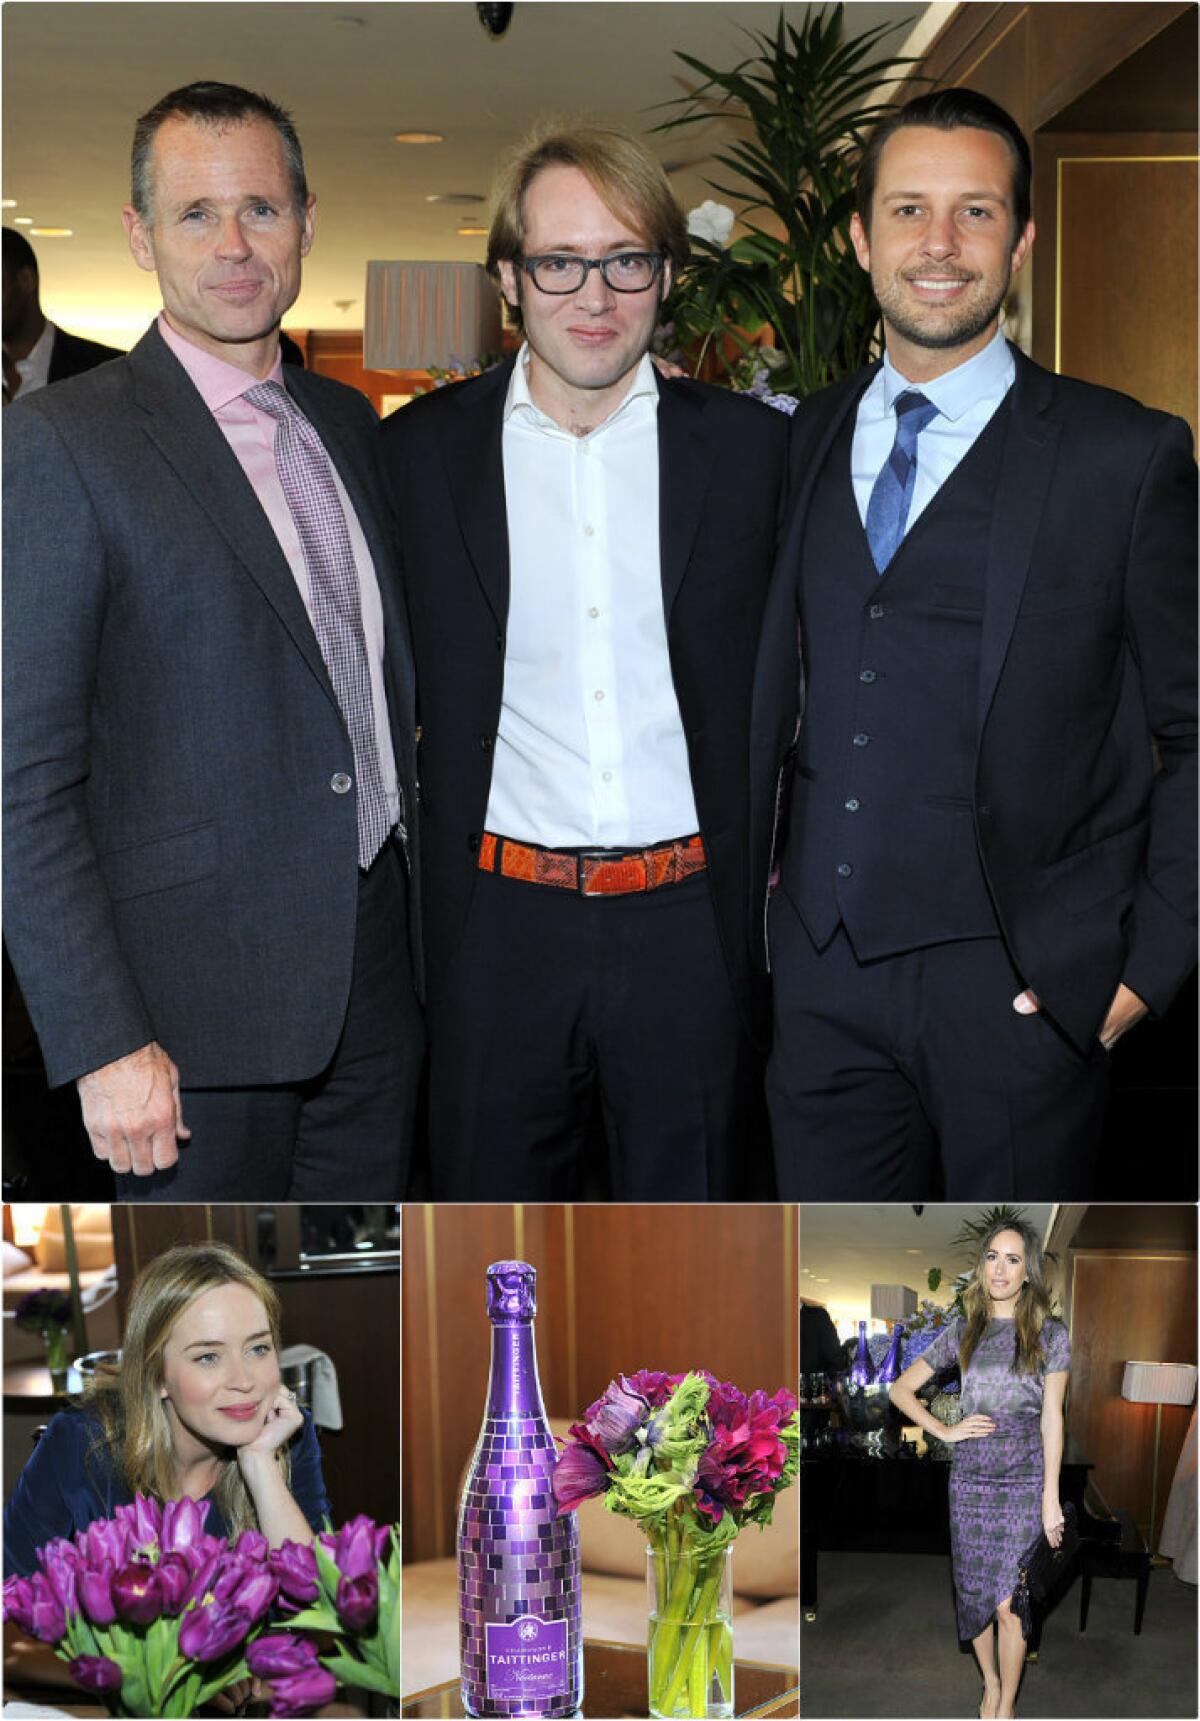 In top photo, from left, are the hosts of Friday's Champagne luncheon: Chris Andrews, Clovis Taittinger and Gary Mantoosh. Proceeding clockwise are fashion journalist Louise Roe; a purple-tiled bottle of Champagne Taittinger Nocturne; and actress Emily Blunt.